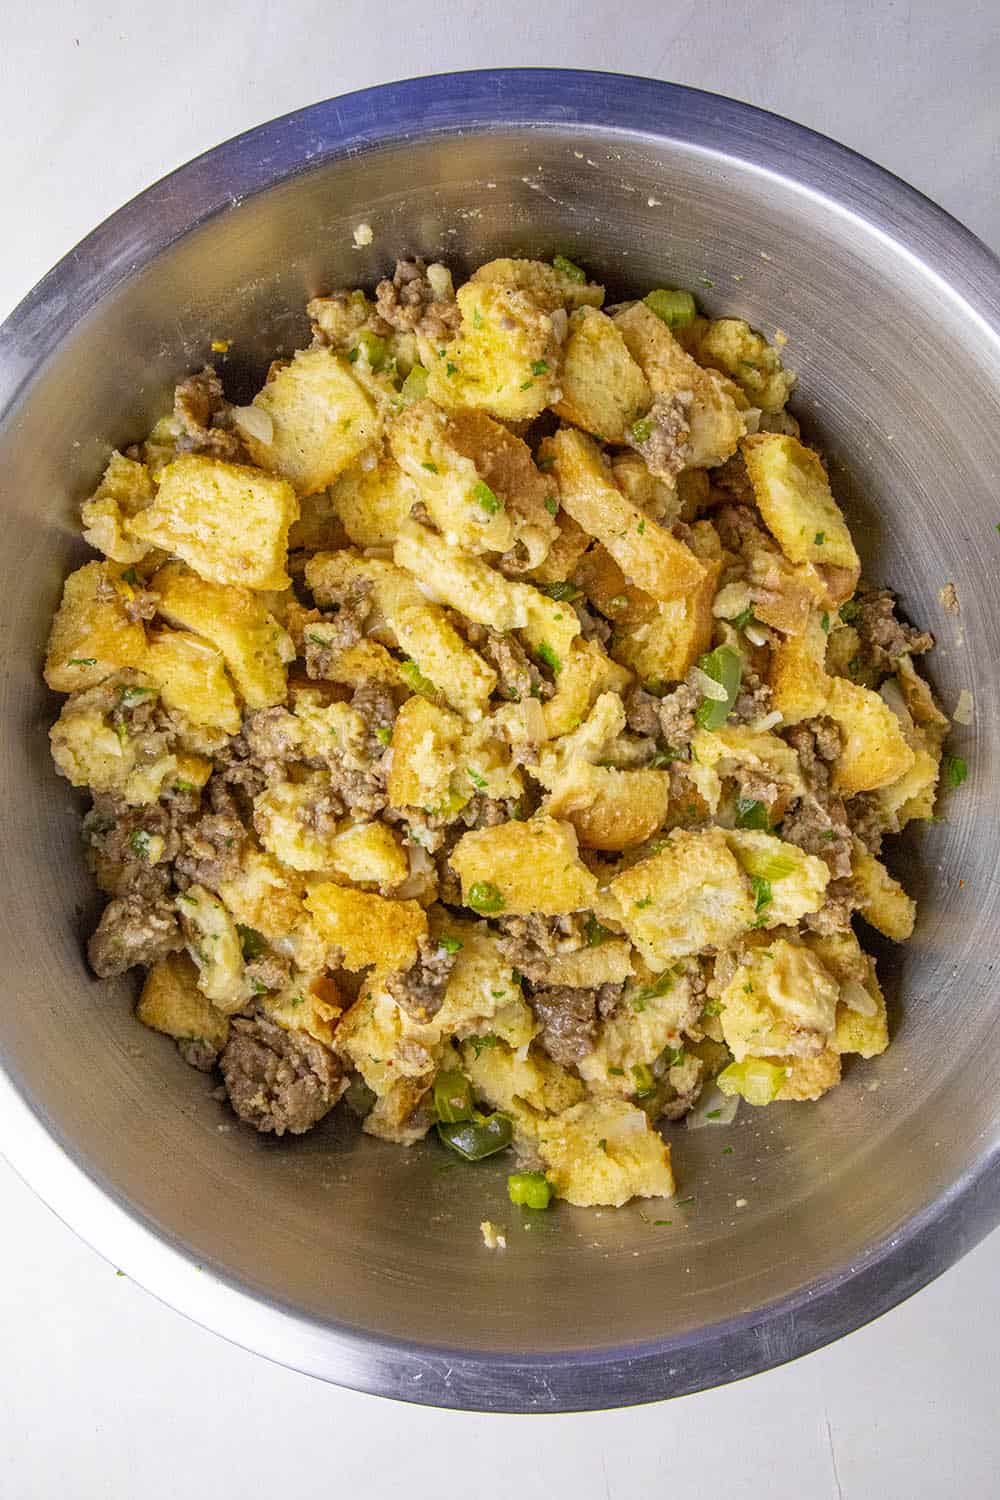 Sausage stuffing mixed up in a bowl, ready for the baking dish